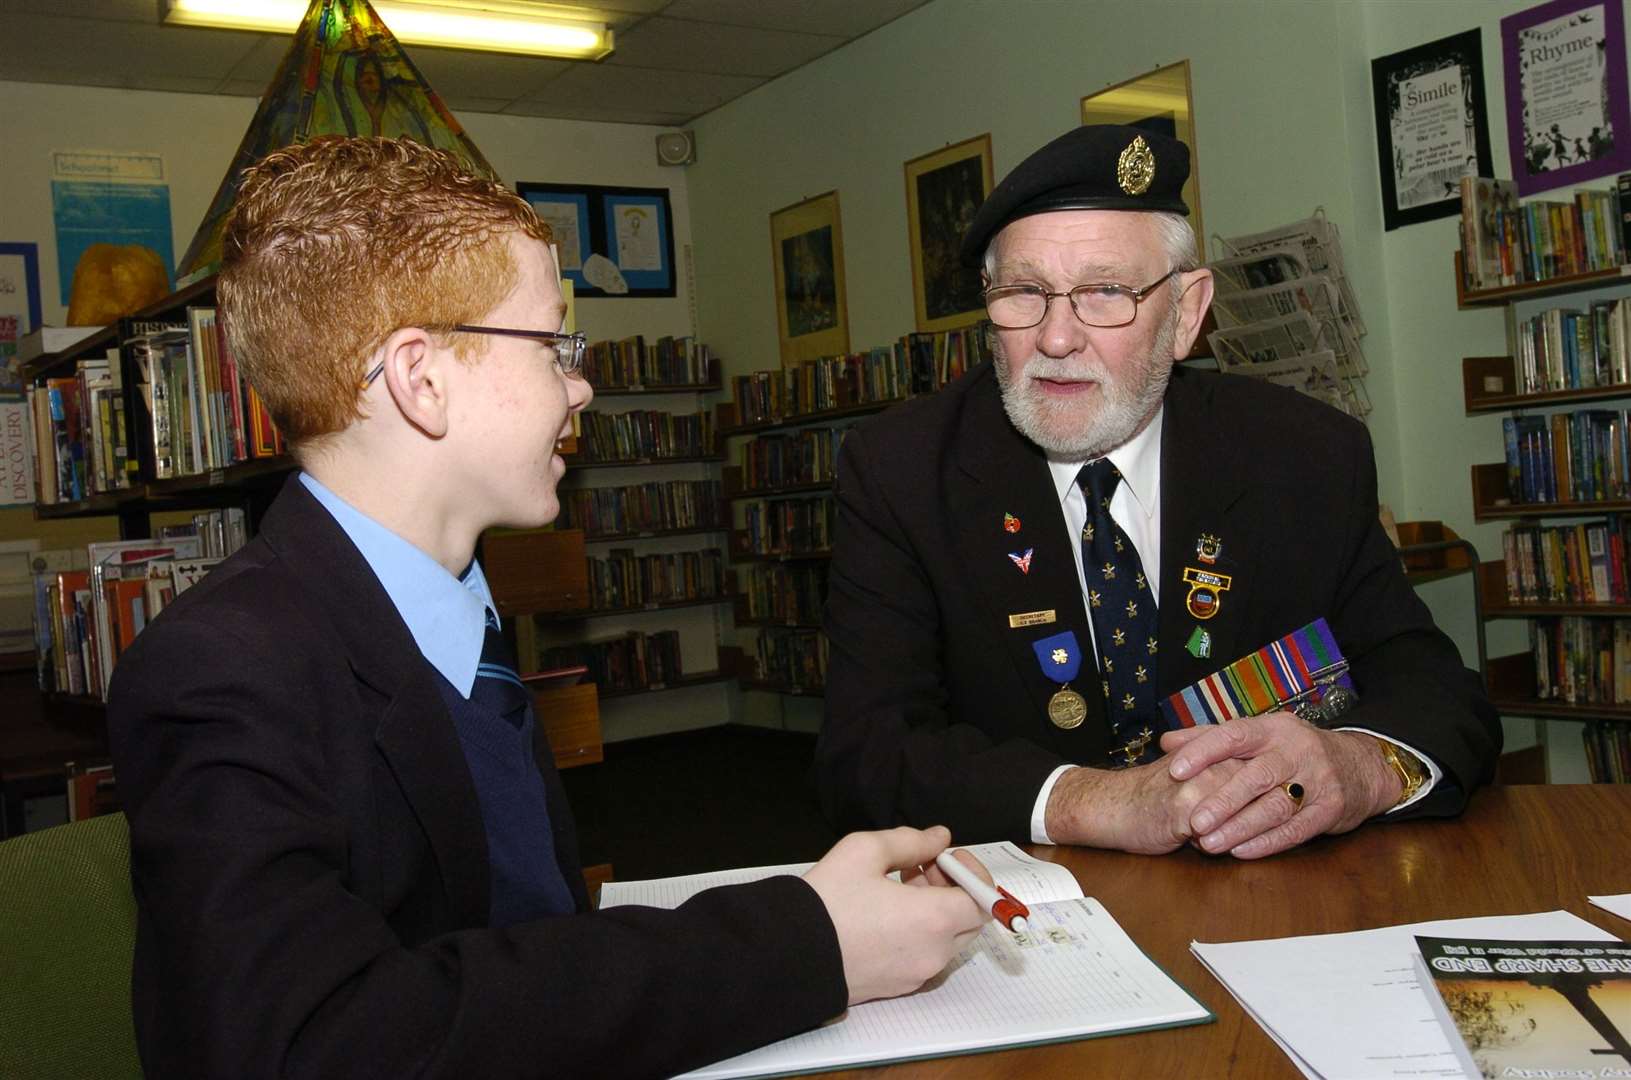 George Batts talks about the war to a pupil at St John's Catholic School in Gravesend